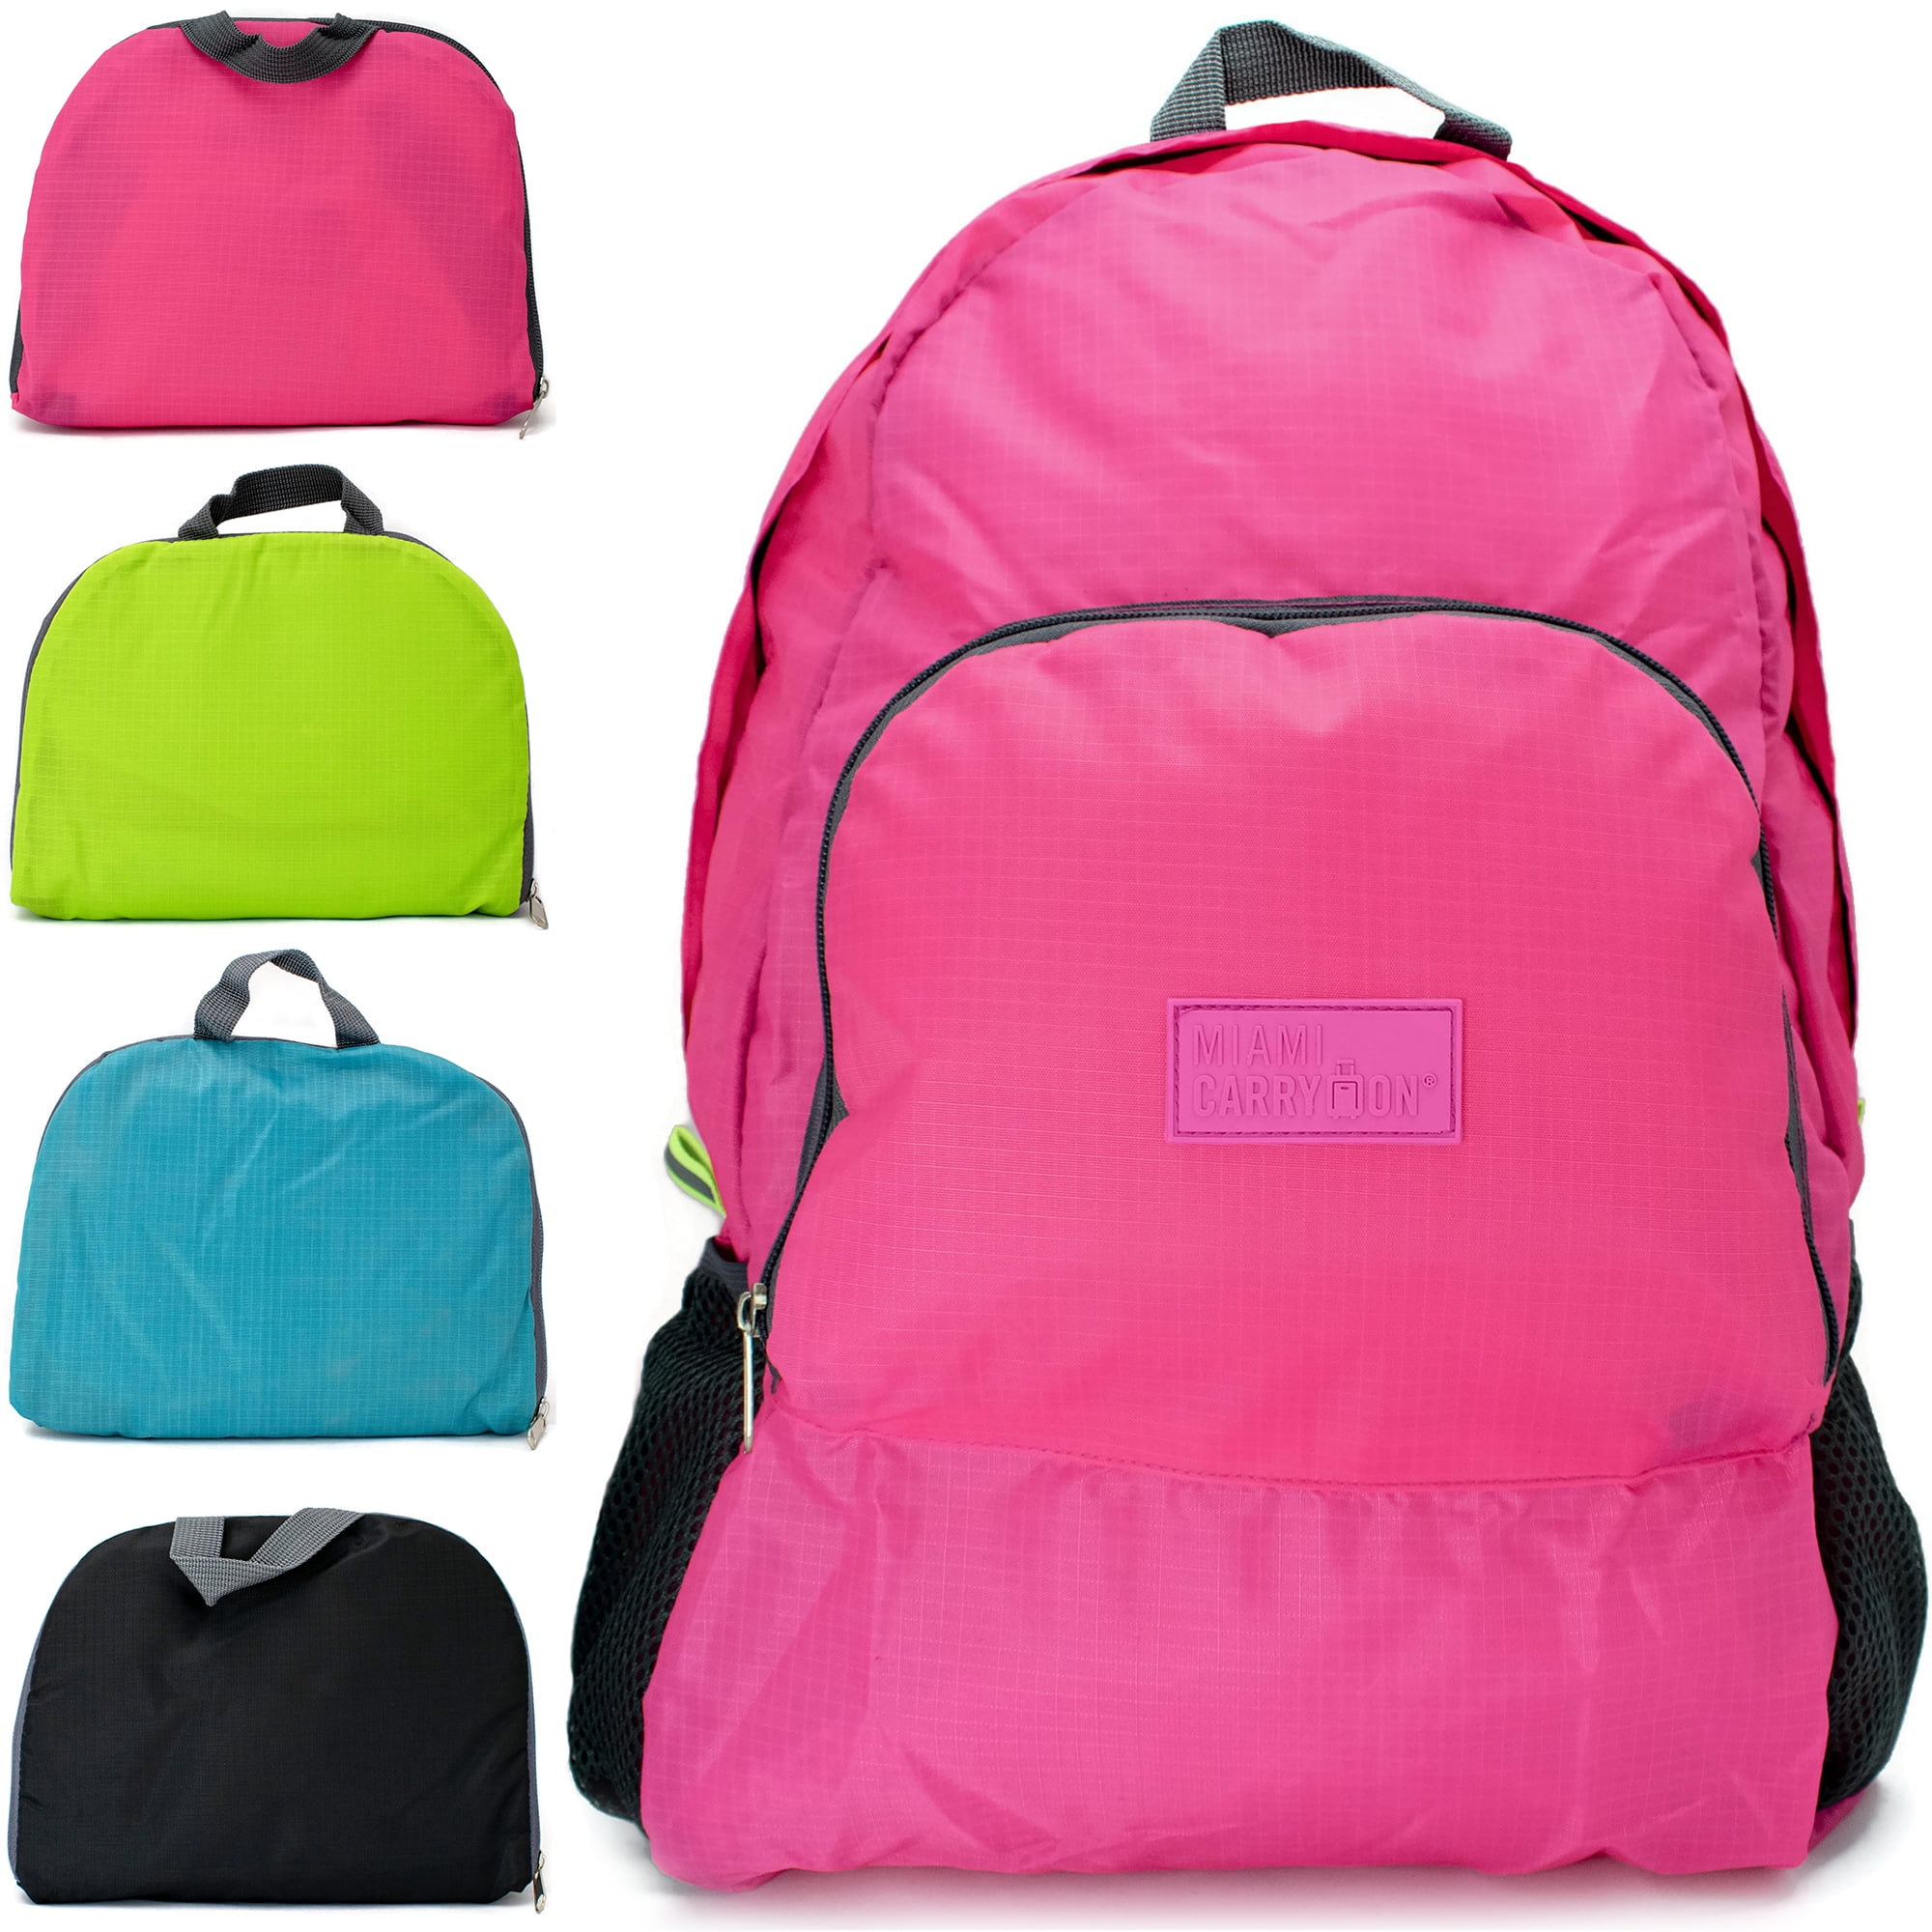 Miami CarryOn Water-resistant Foldable Backpack/Daypack - Walmart.com